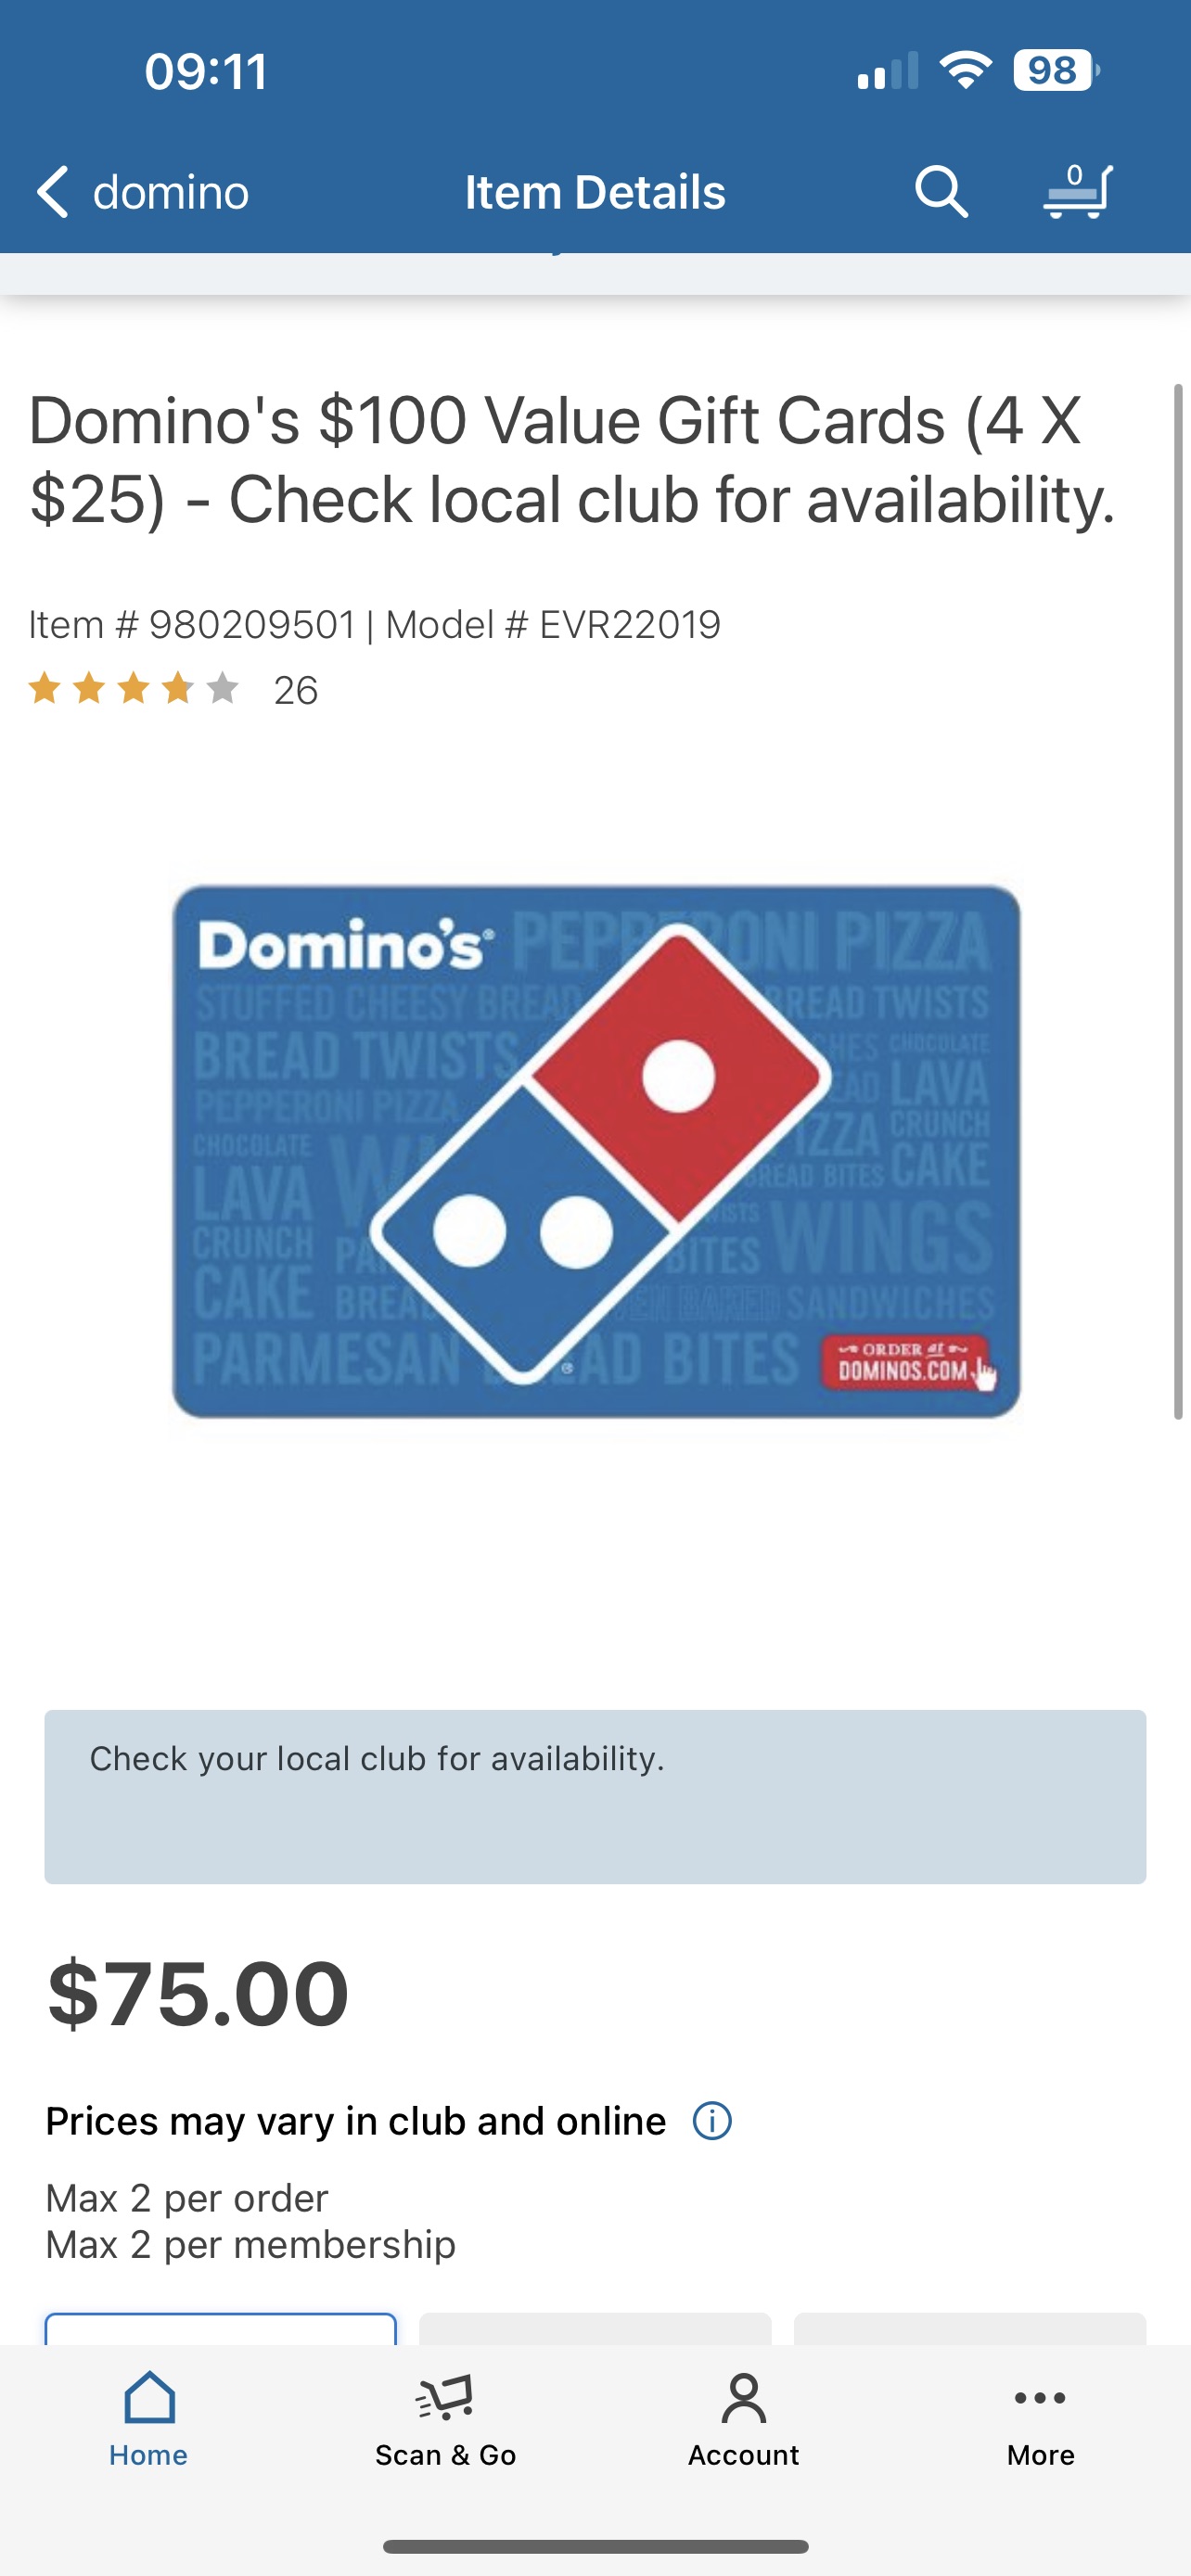 Domino's $100 Value Gift Cards (4 X $25) - Check local club for availability. - Sam's Club